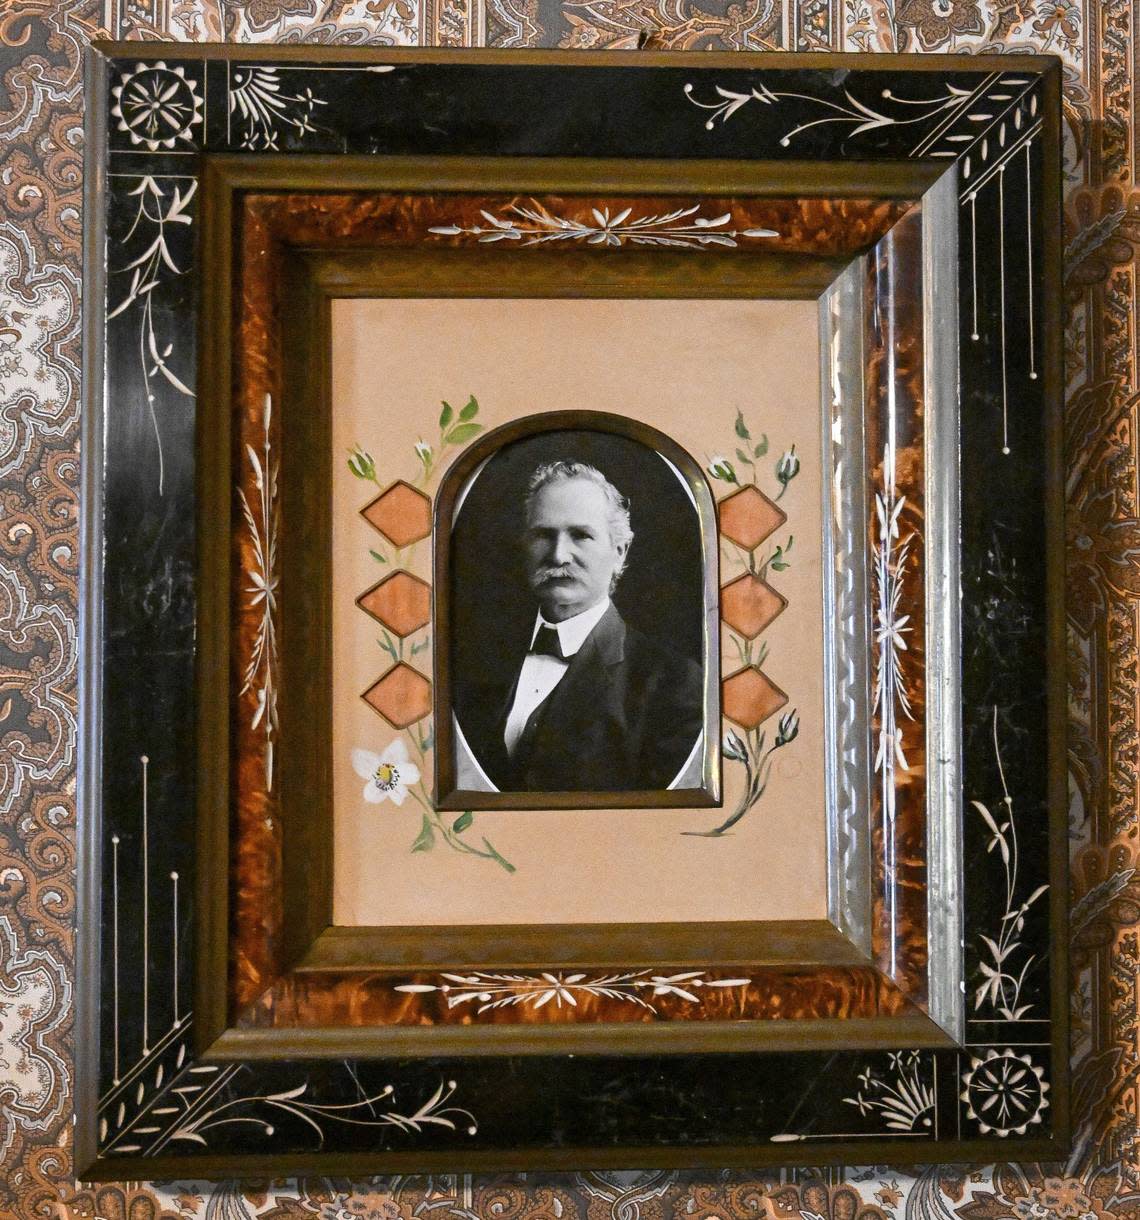 A photo of Thomas Meux hangs on a wall of the home he had built in Fresno in 1888. Meux as a surgeon during the Civil War and continued his medical practice in Fresno and became a well-known influence in the medical and agricultural communities. CRAIG KOHLRUSS/ckohlruss@fresnobee.com